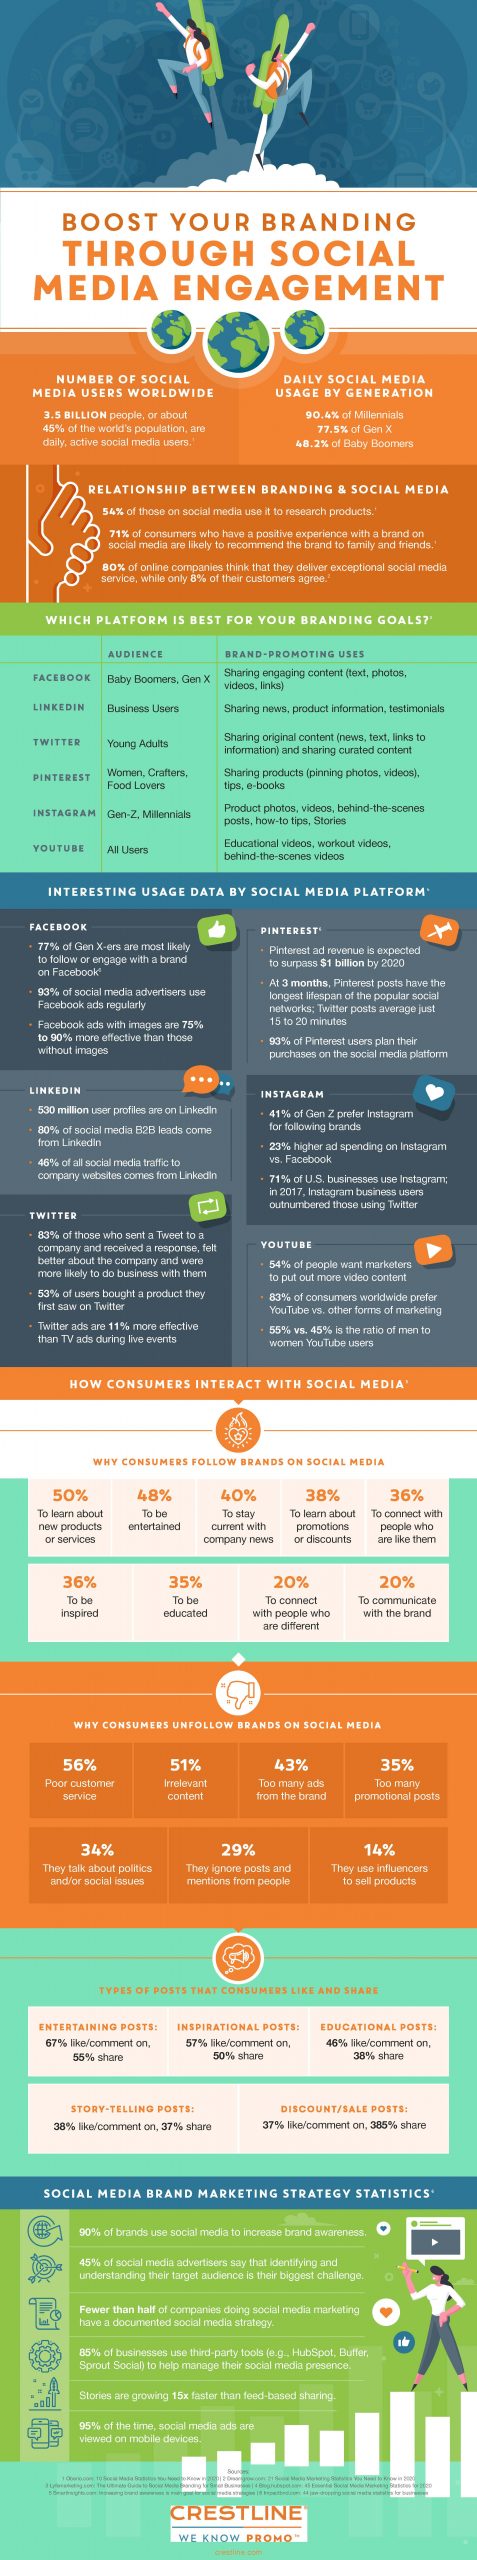 boost your brand through social media engagement infographic